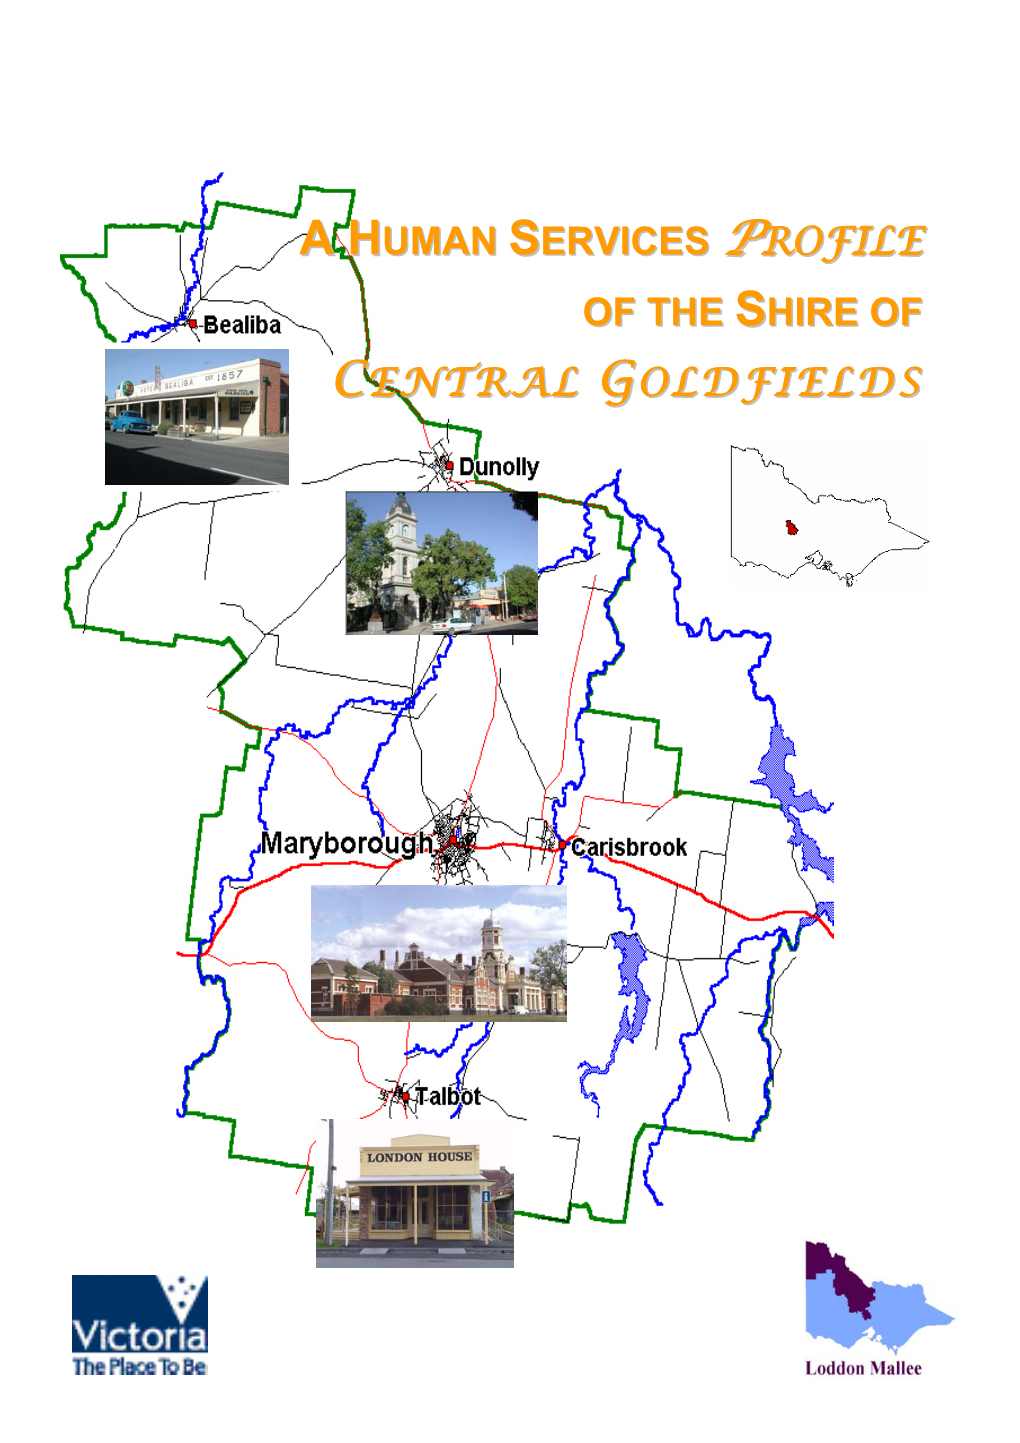 A Human Services Profile of the Shire of Central Goldfields